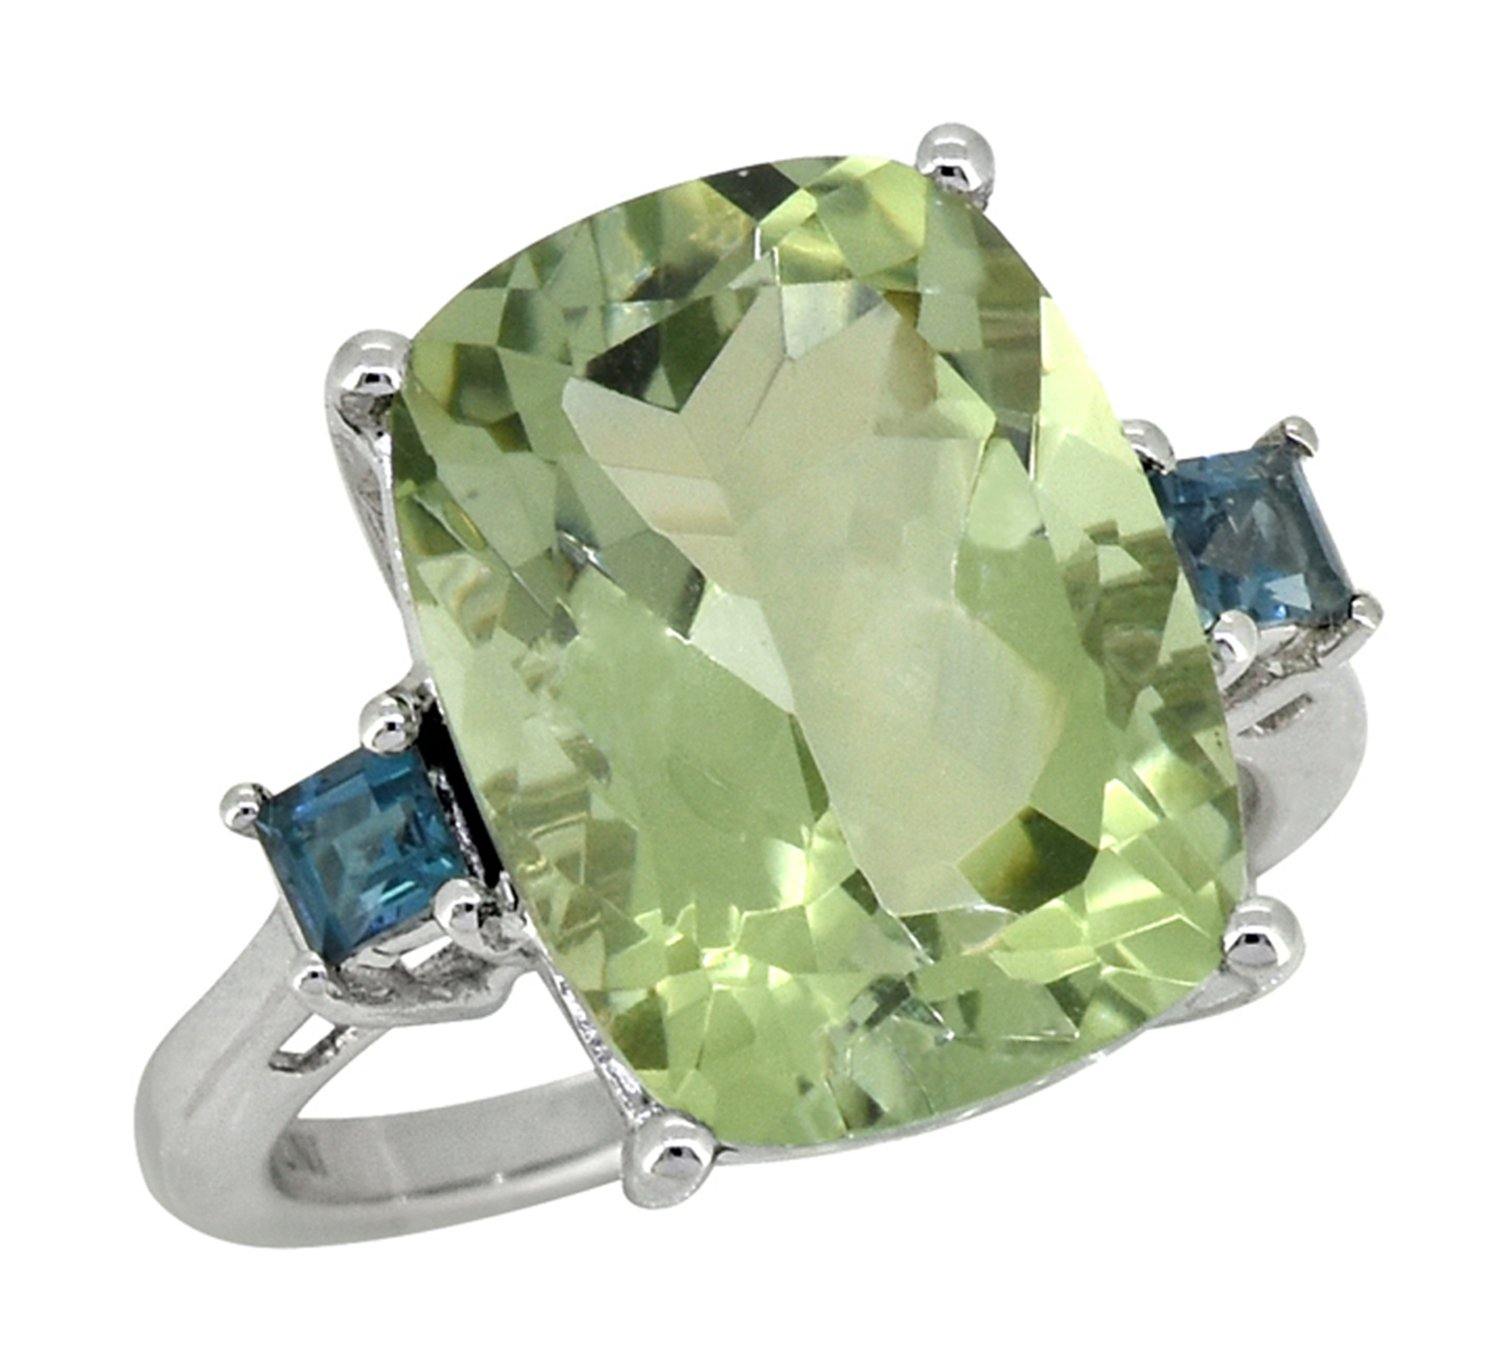 11.18 Ct Green Amethyst London Blue Topaz Solid 925 Sterling Silver Ring Jewelry - YoTreasure